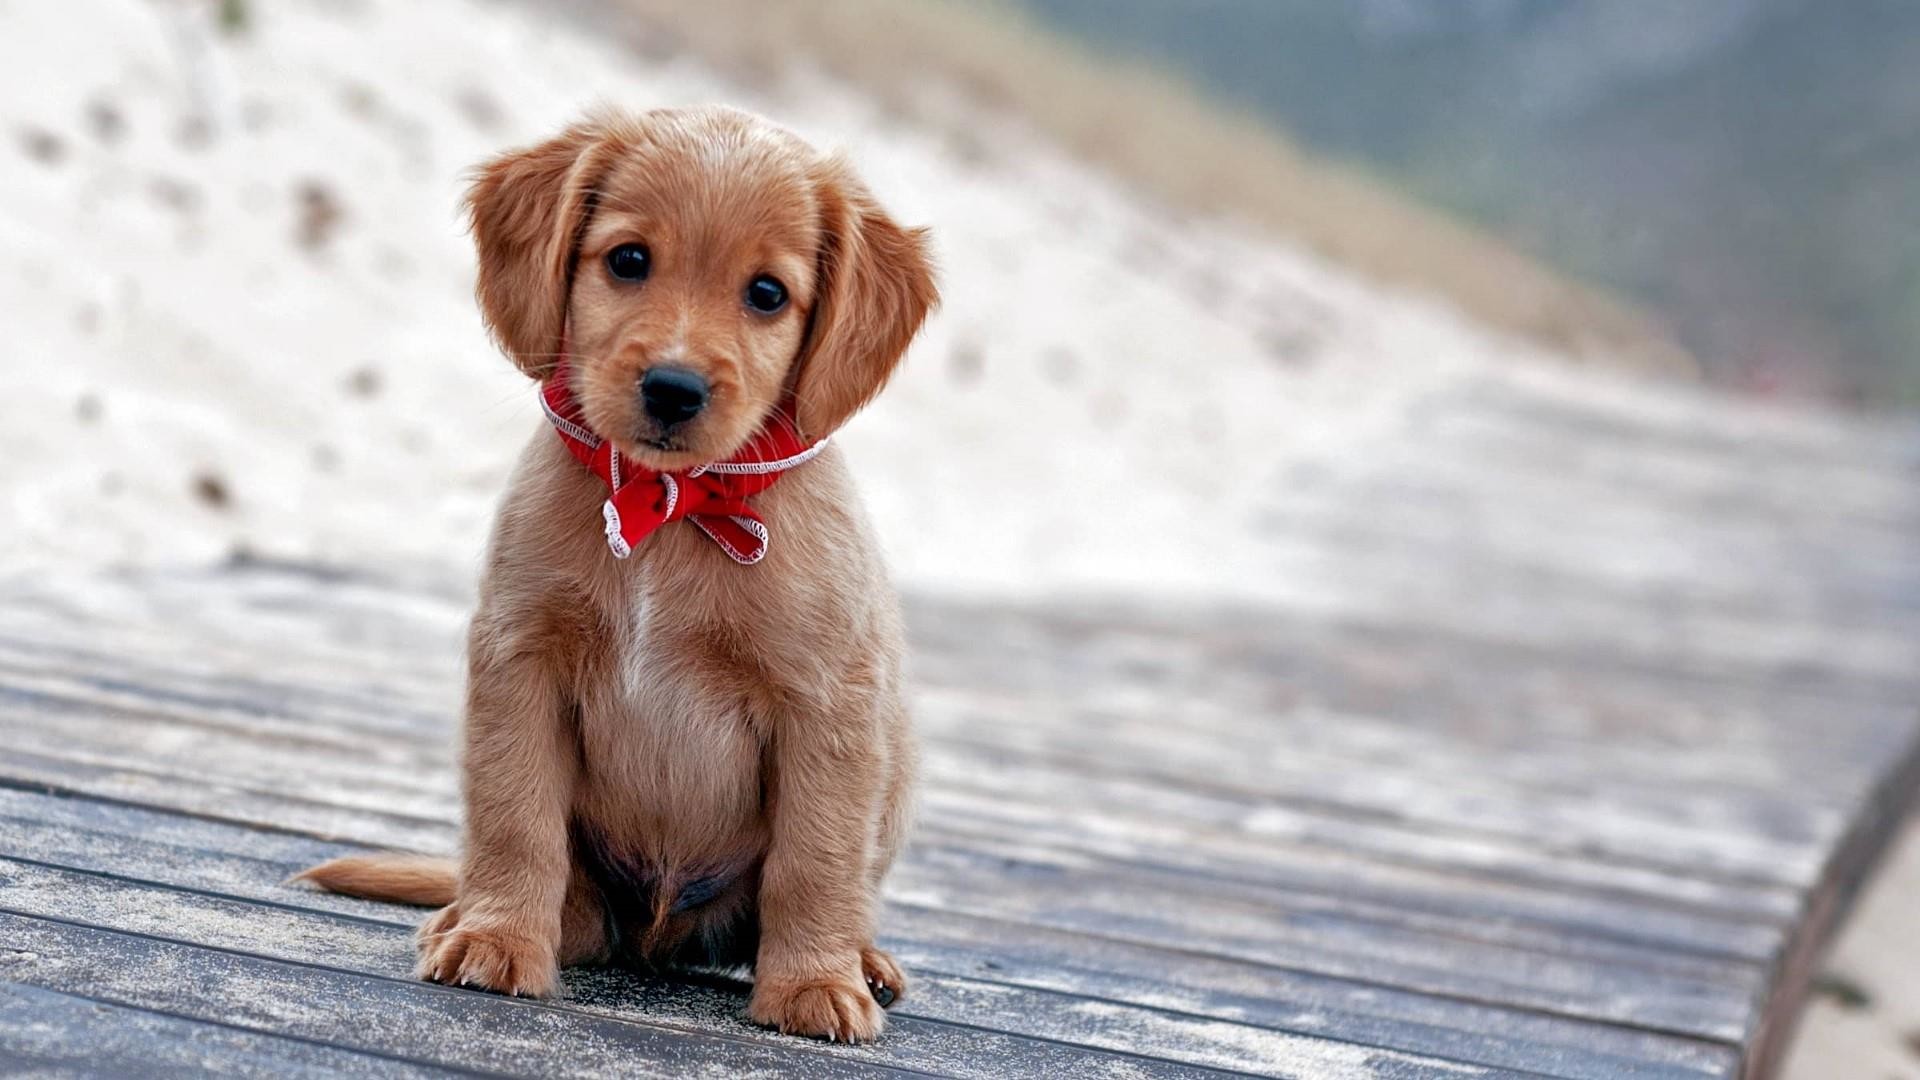 Puppy Wallpapers Free / Free Download Cute Puppy Wallpapers